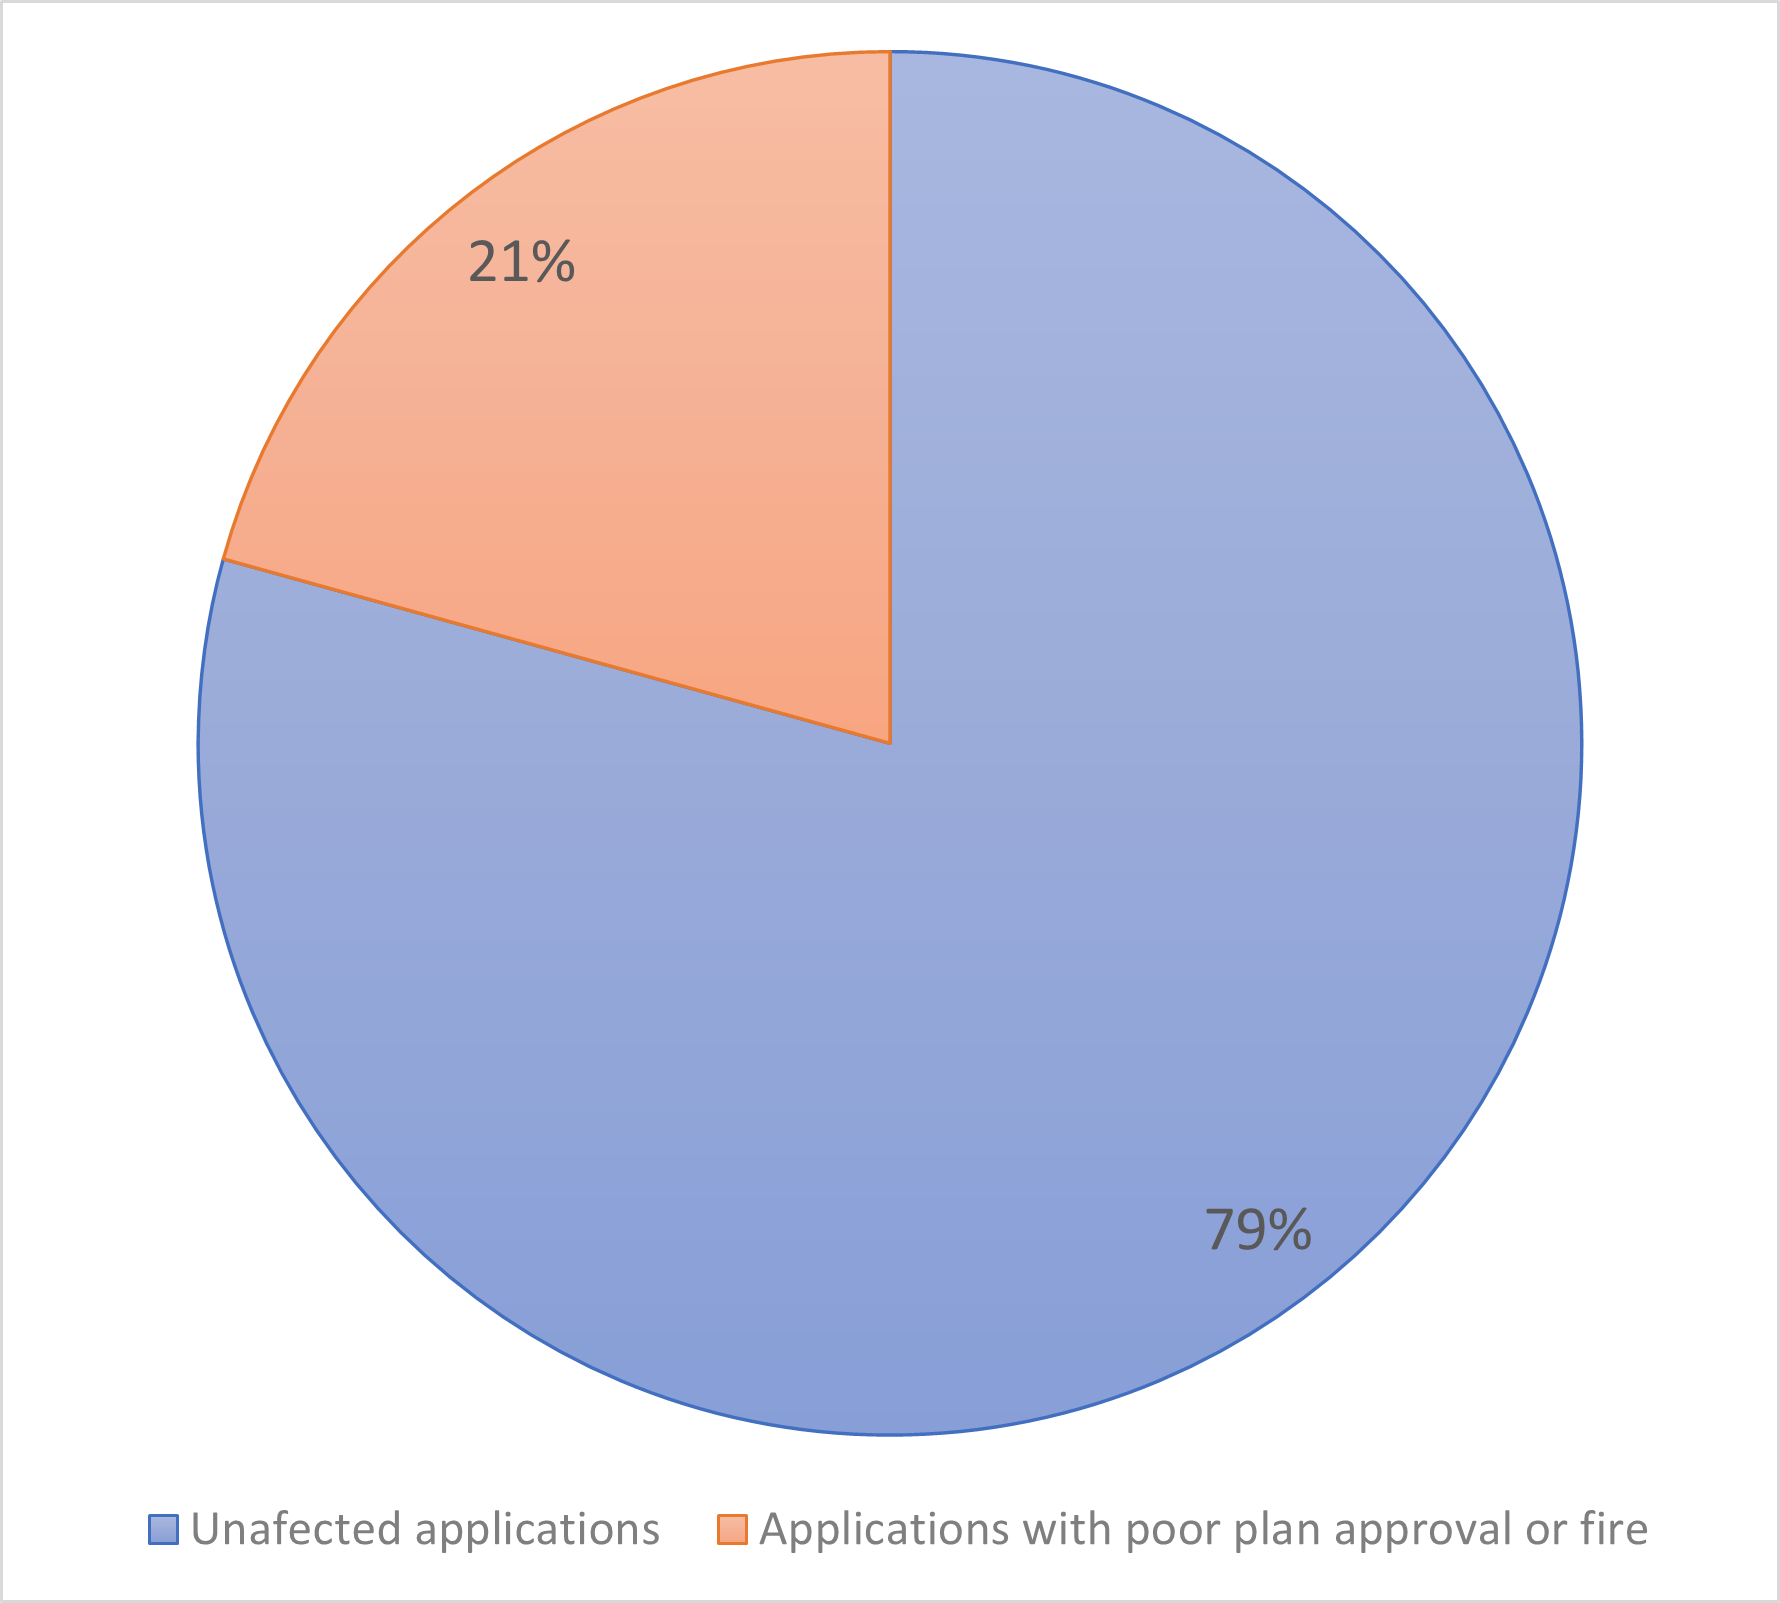 Image 2 identified that unaffected applications represented 79% of the reasons for refusal of an application and that applications with poor plan approval for fire represented 21%  of the reasons for refusal of an application 